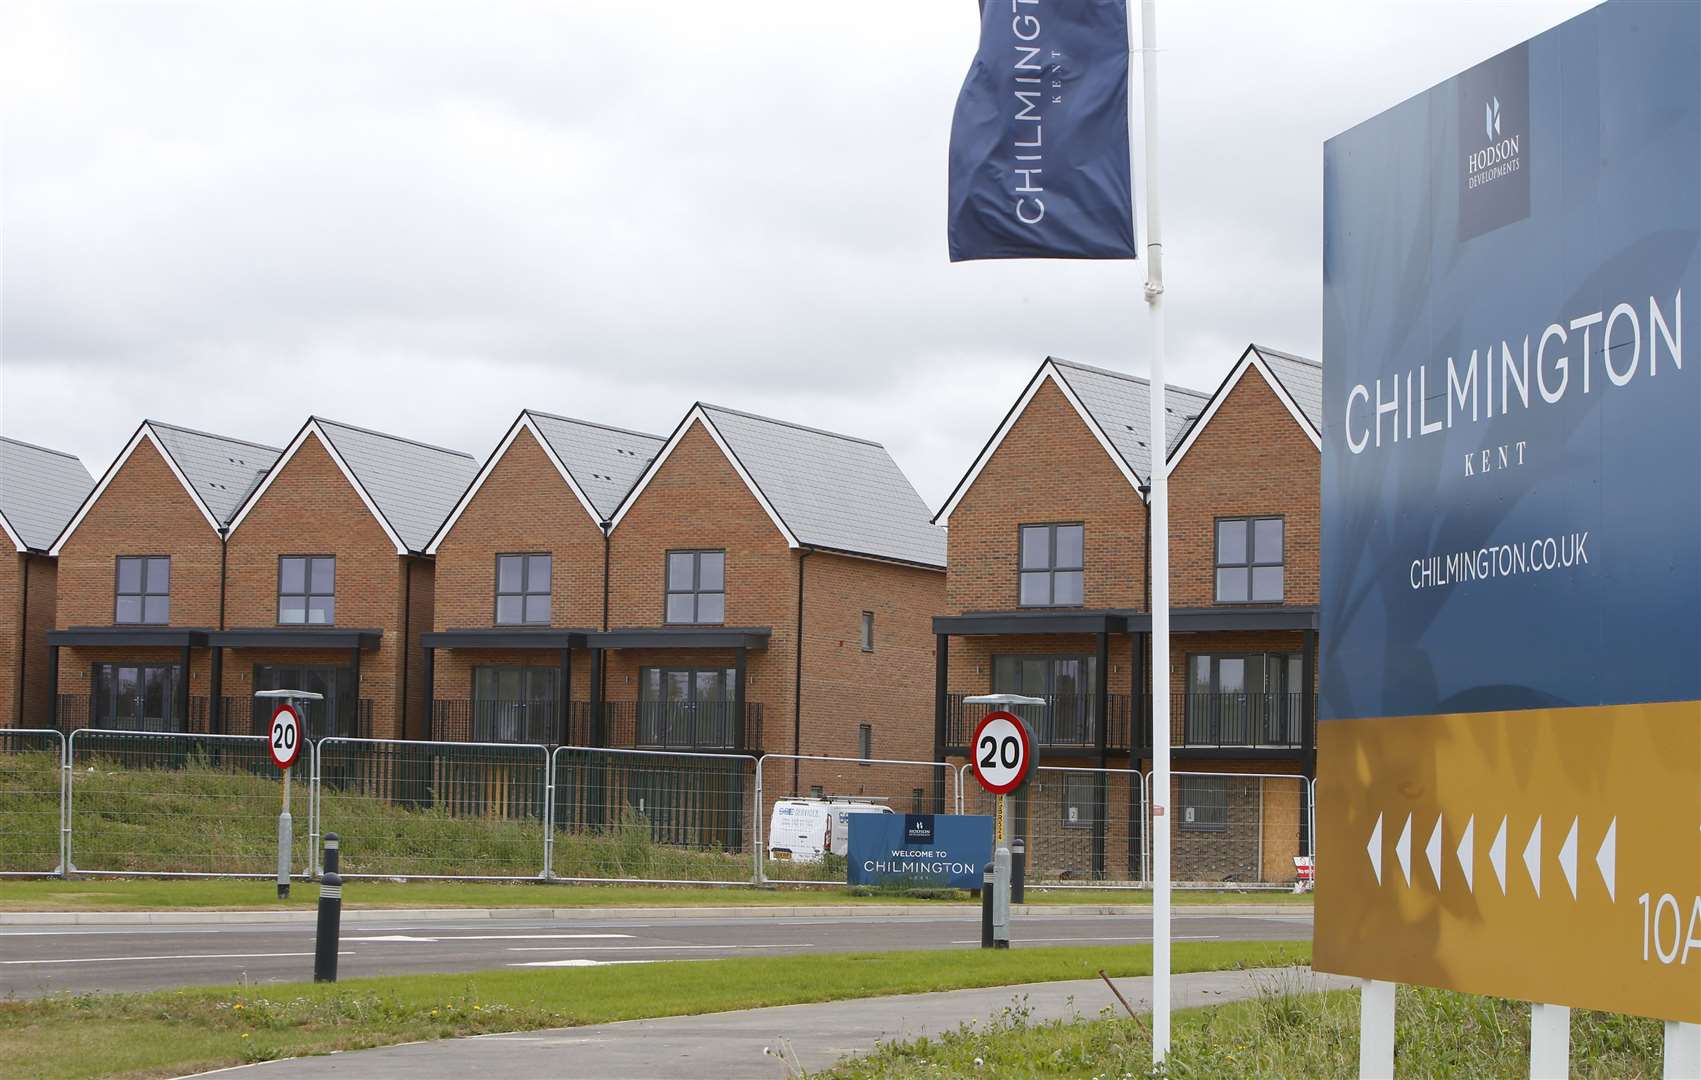 The first residents moved into the Chilmington Green development last year